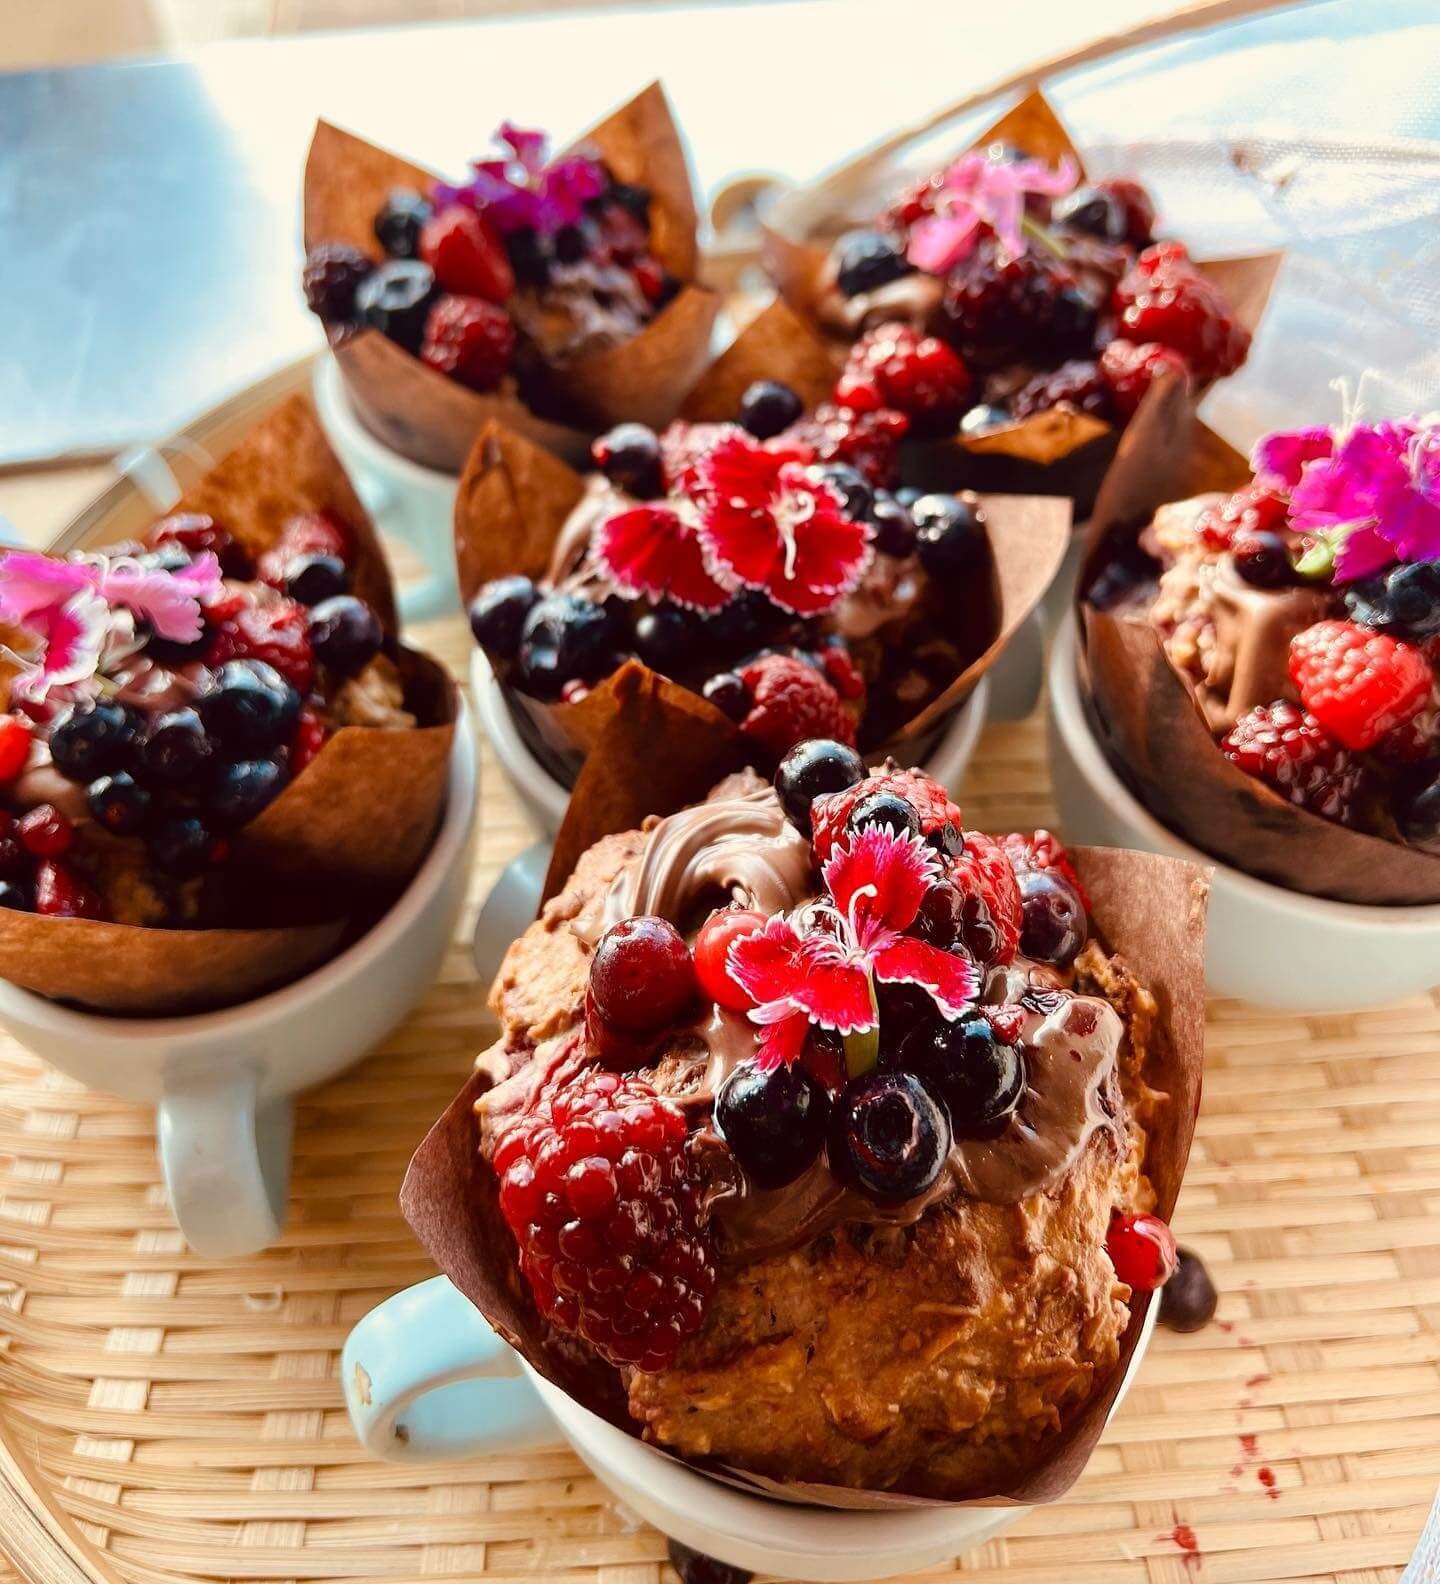 Chocolate muffins with berries on top